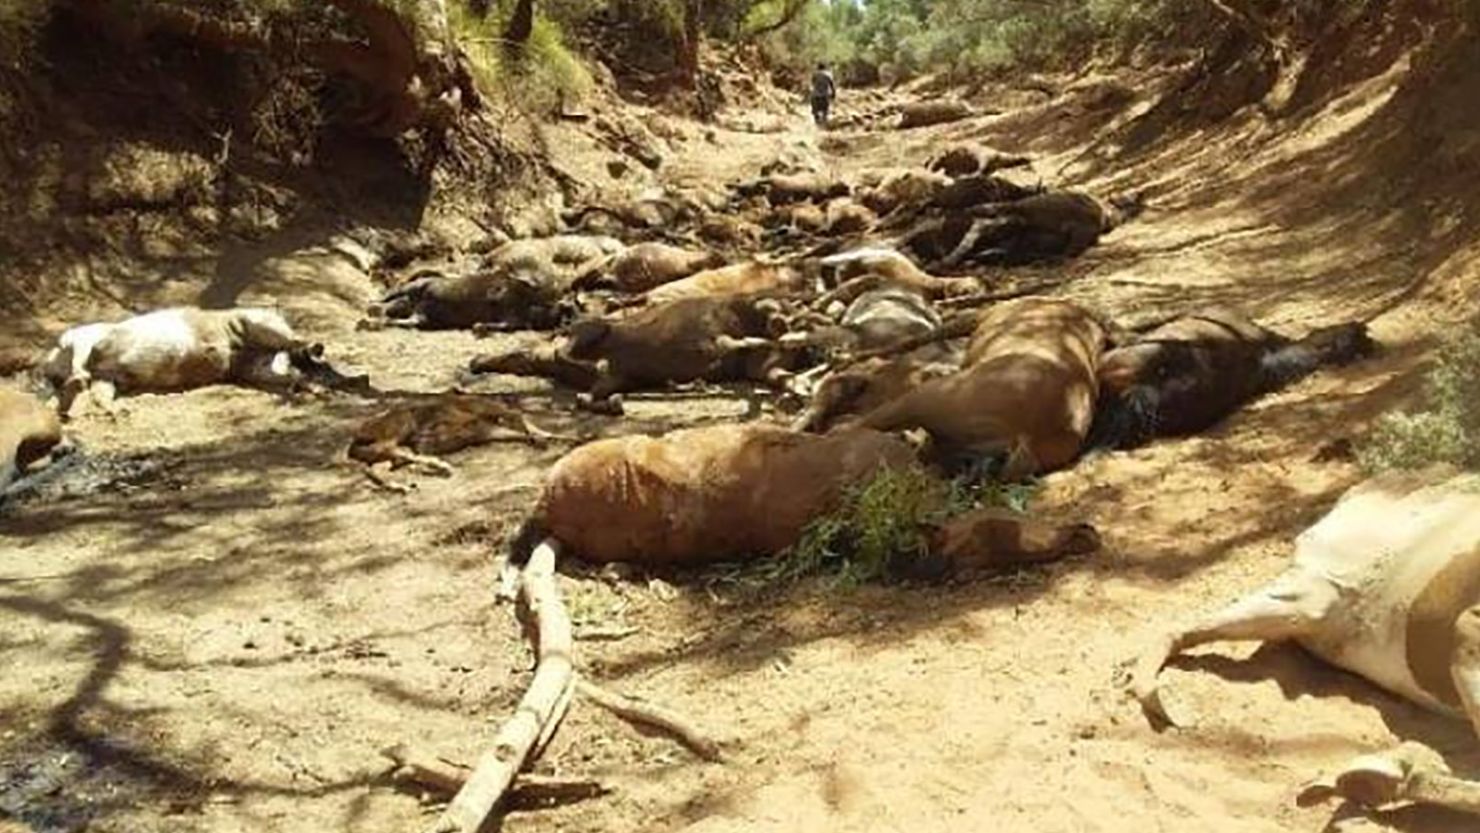 The bodies of dozens of wild horses were found in a dried-up waterhole in Northern Territory, Australia. 